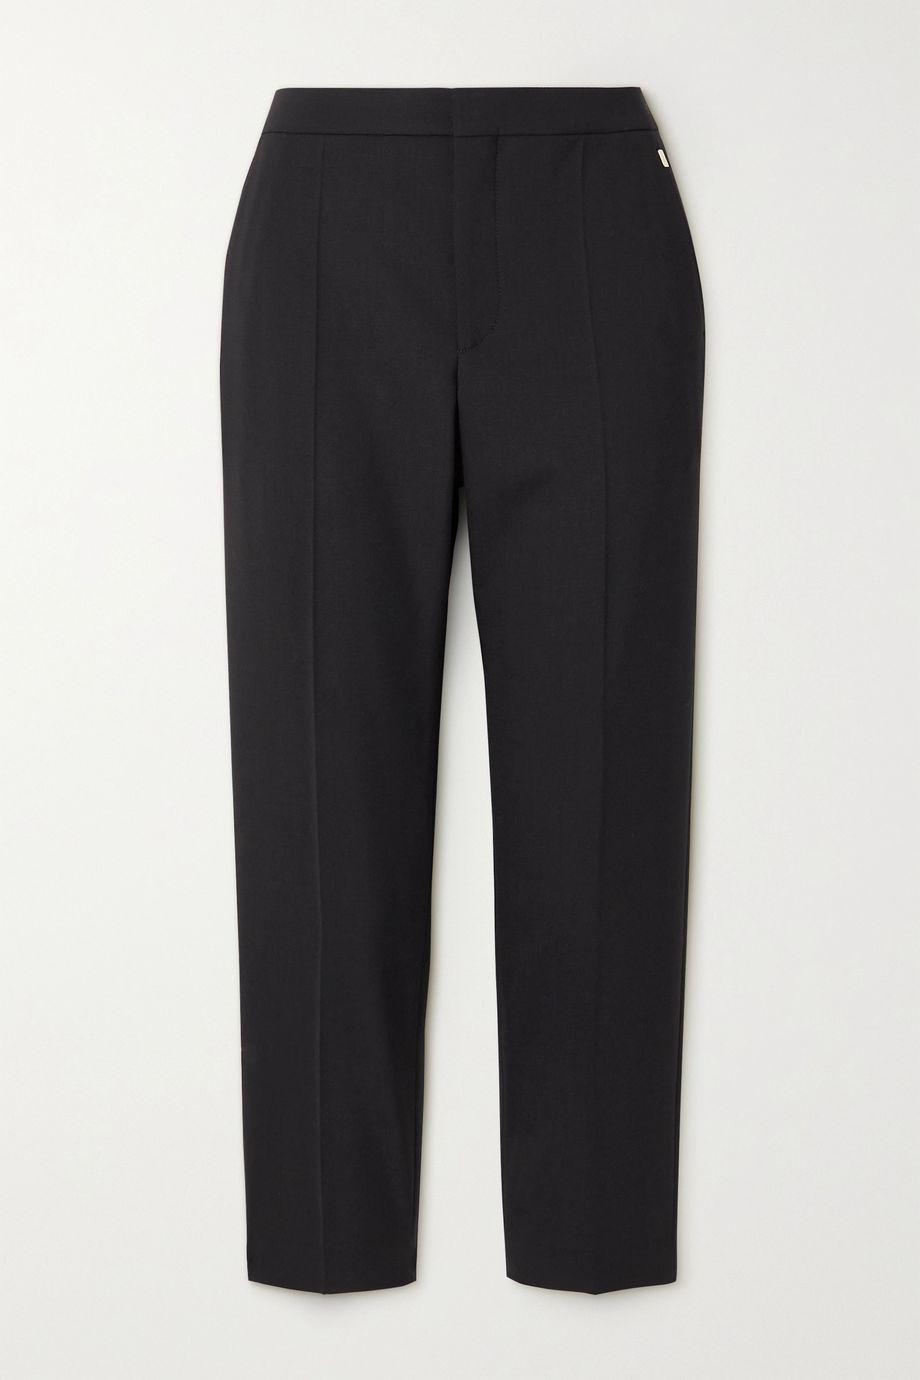 Cropped wool-blend tapered pants by CHLOE